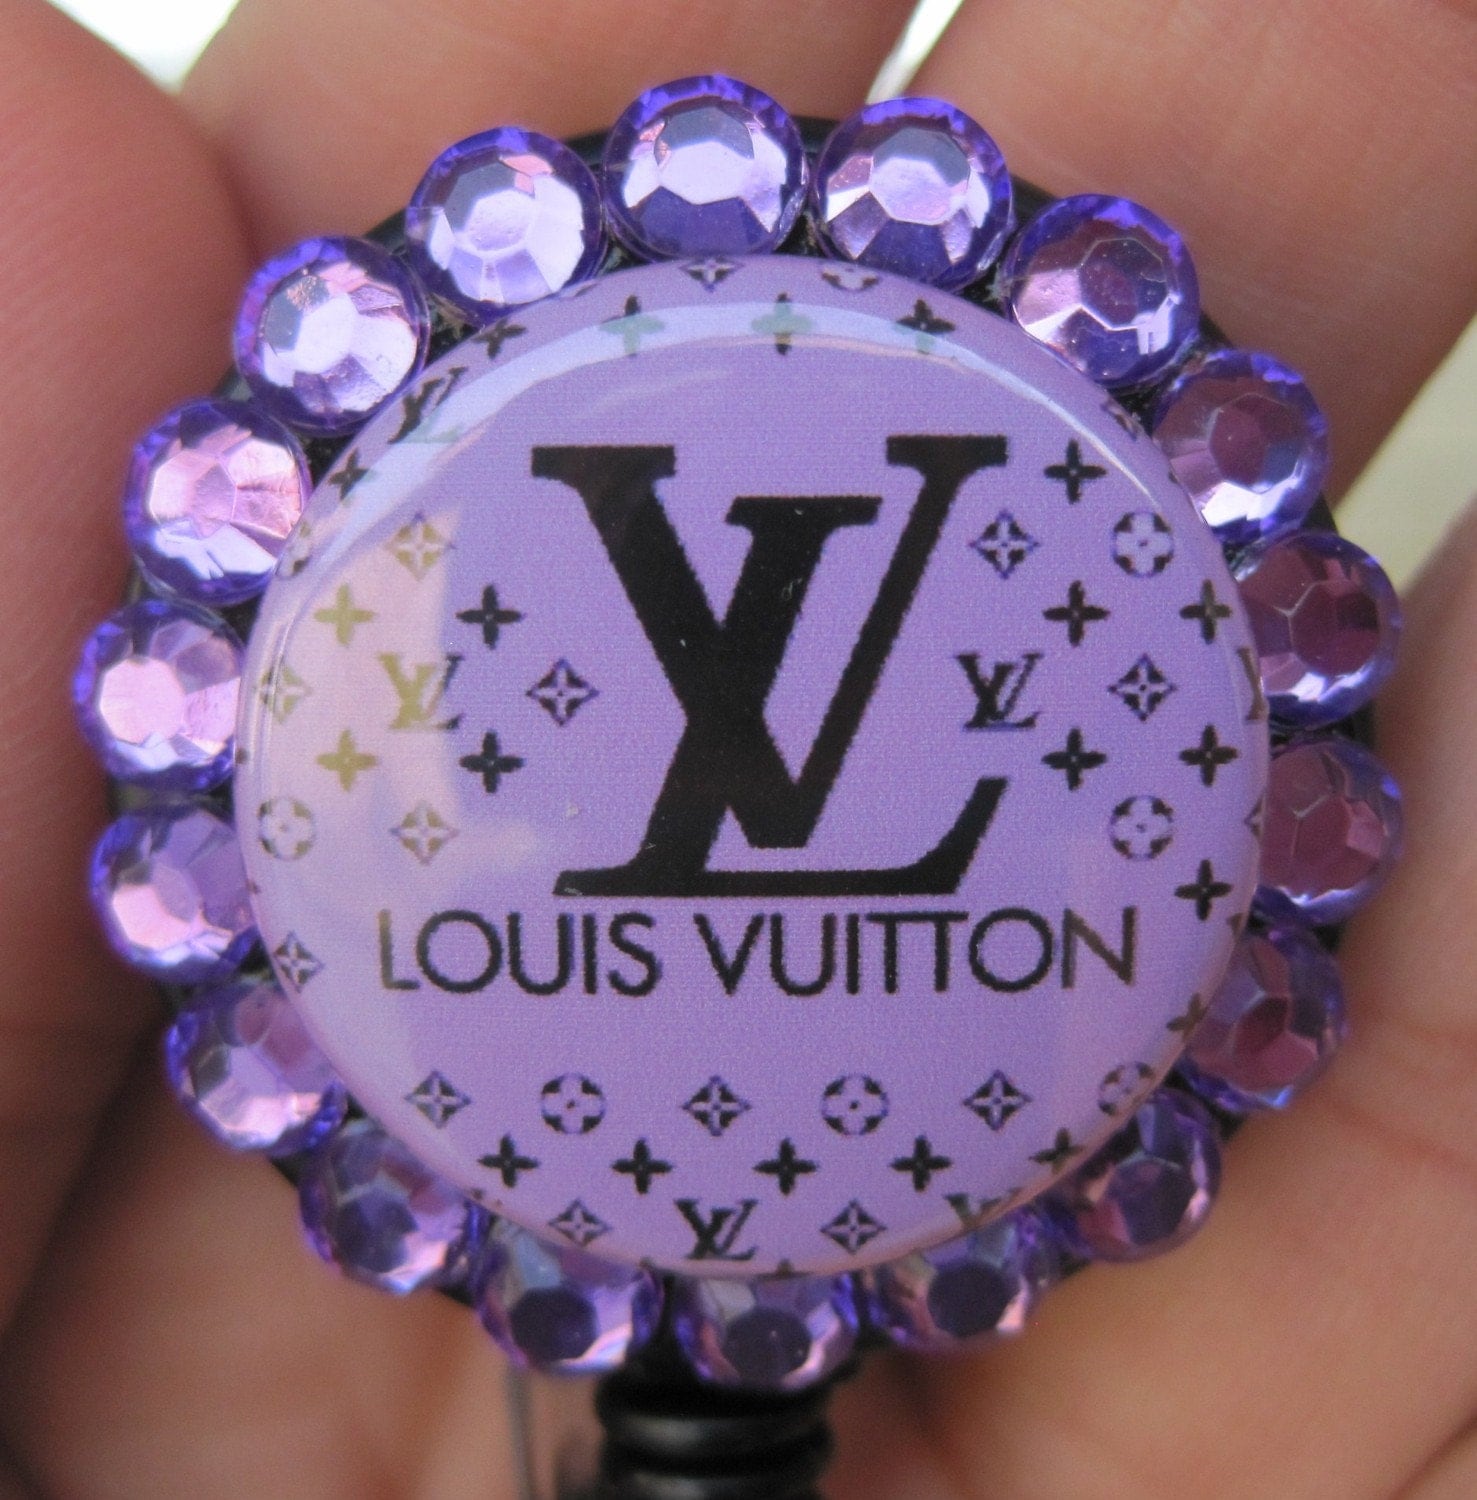 LOUIS VUITTON Badge Holder ID retractable reel with ACRYLIC